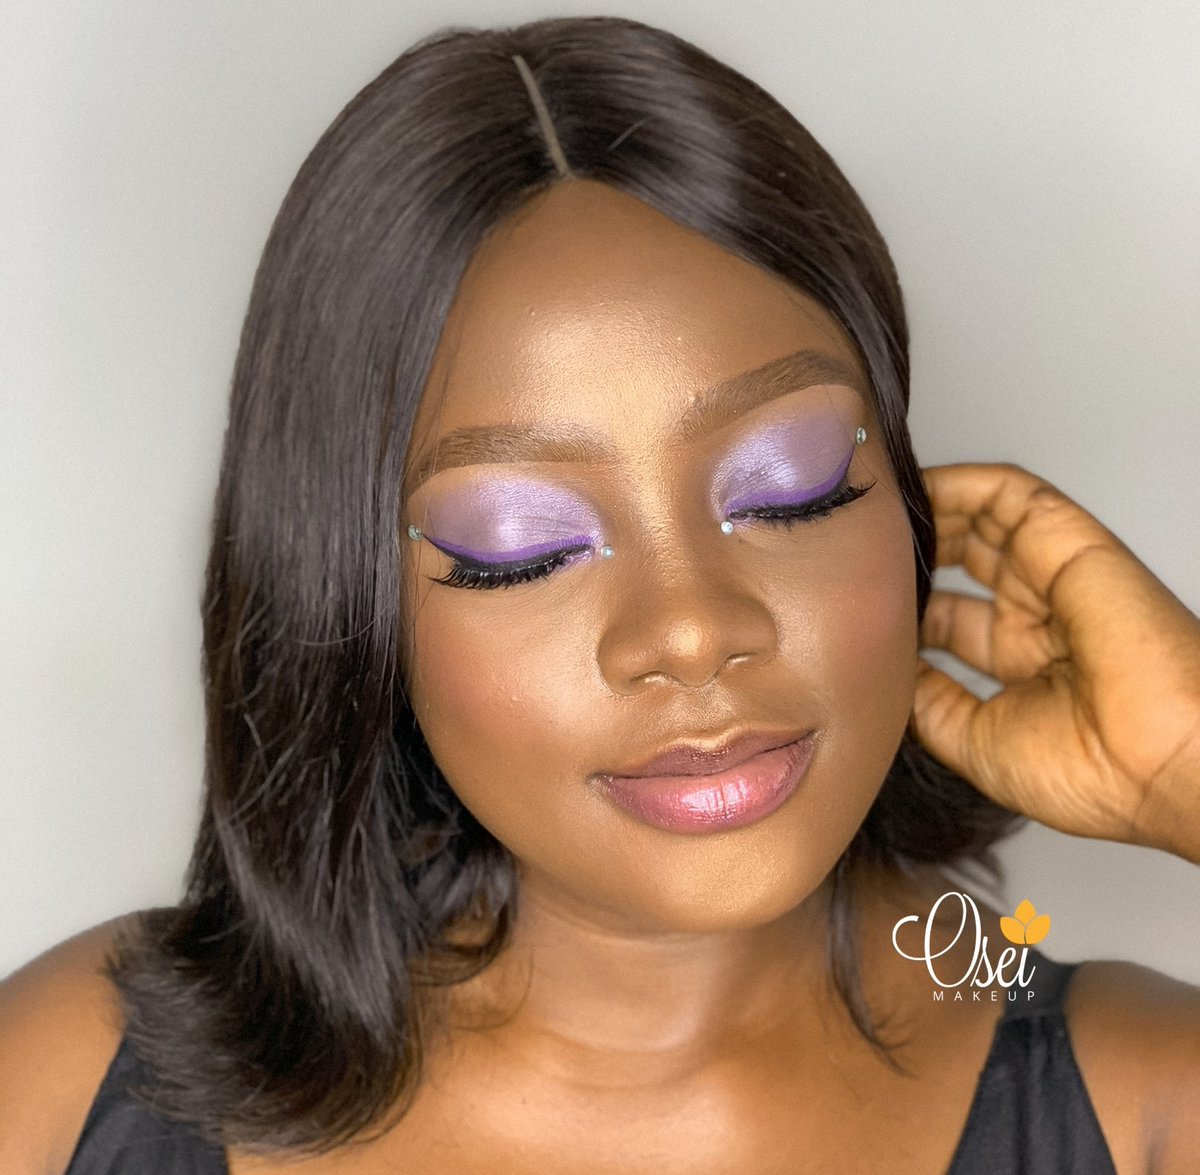 Bringing back the #ColoredLinerSeries with @EhitaUyi serving face!!!!
-
#oseimakeup #oseibyvictori #lagosmakeupartist #makeupartistinlagos #makeupartistinlekki #makeupartistinikoyi #makeupartistinvictoriaisland